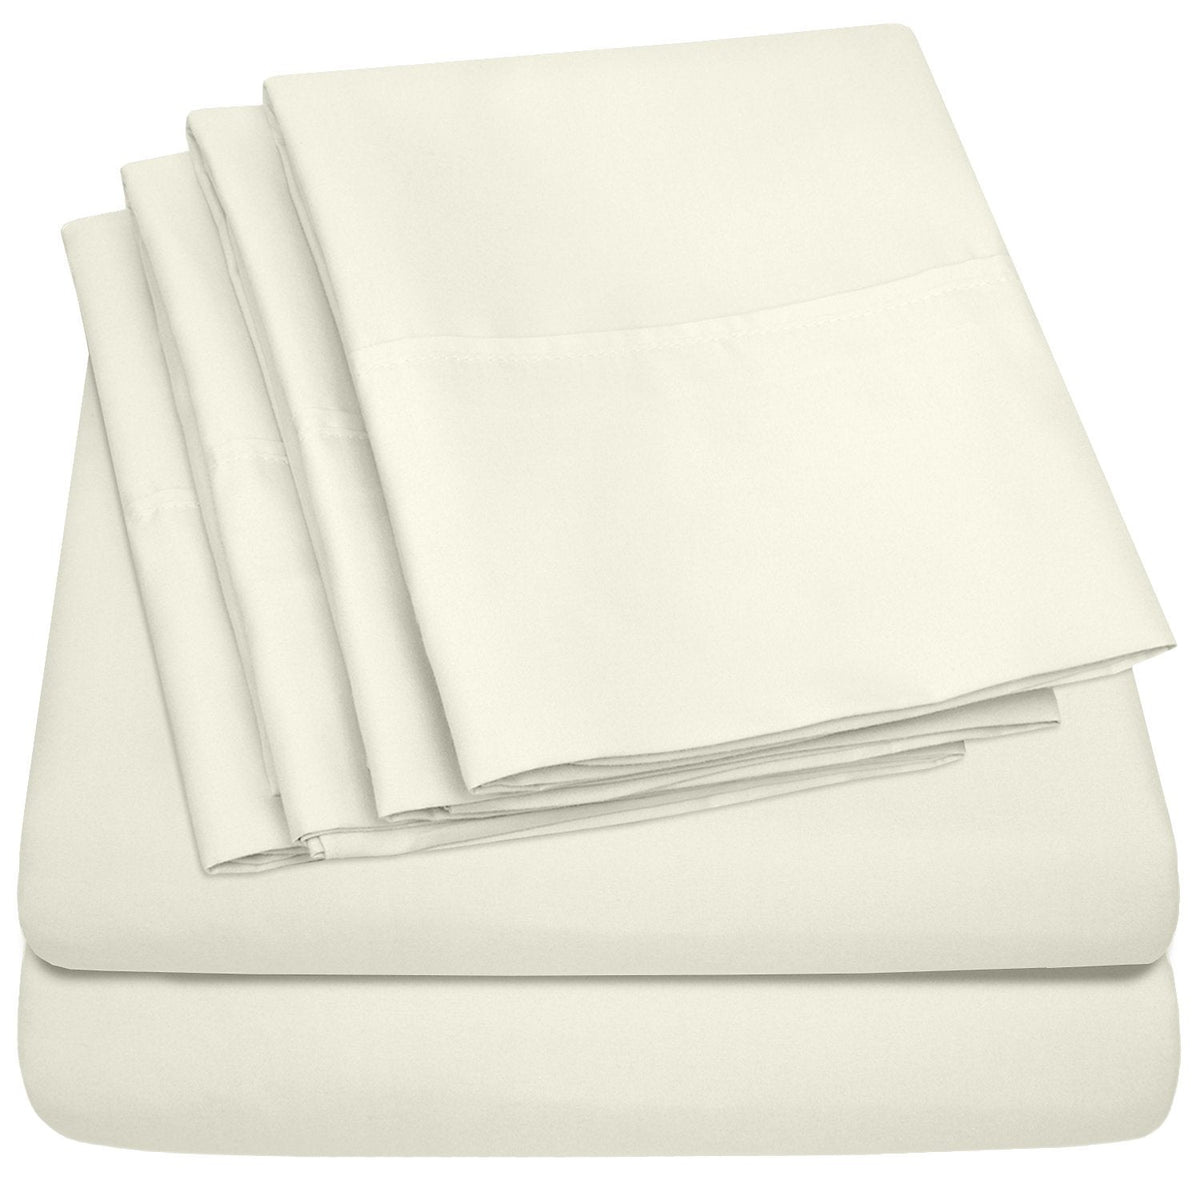 Deluxe 6-Piece Bed Sheet Set (Ivory) - Folded